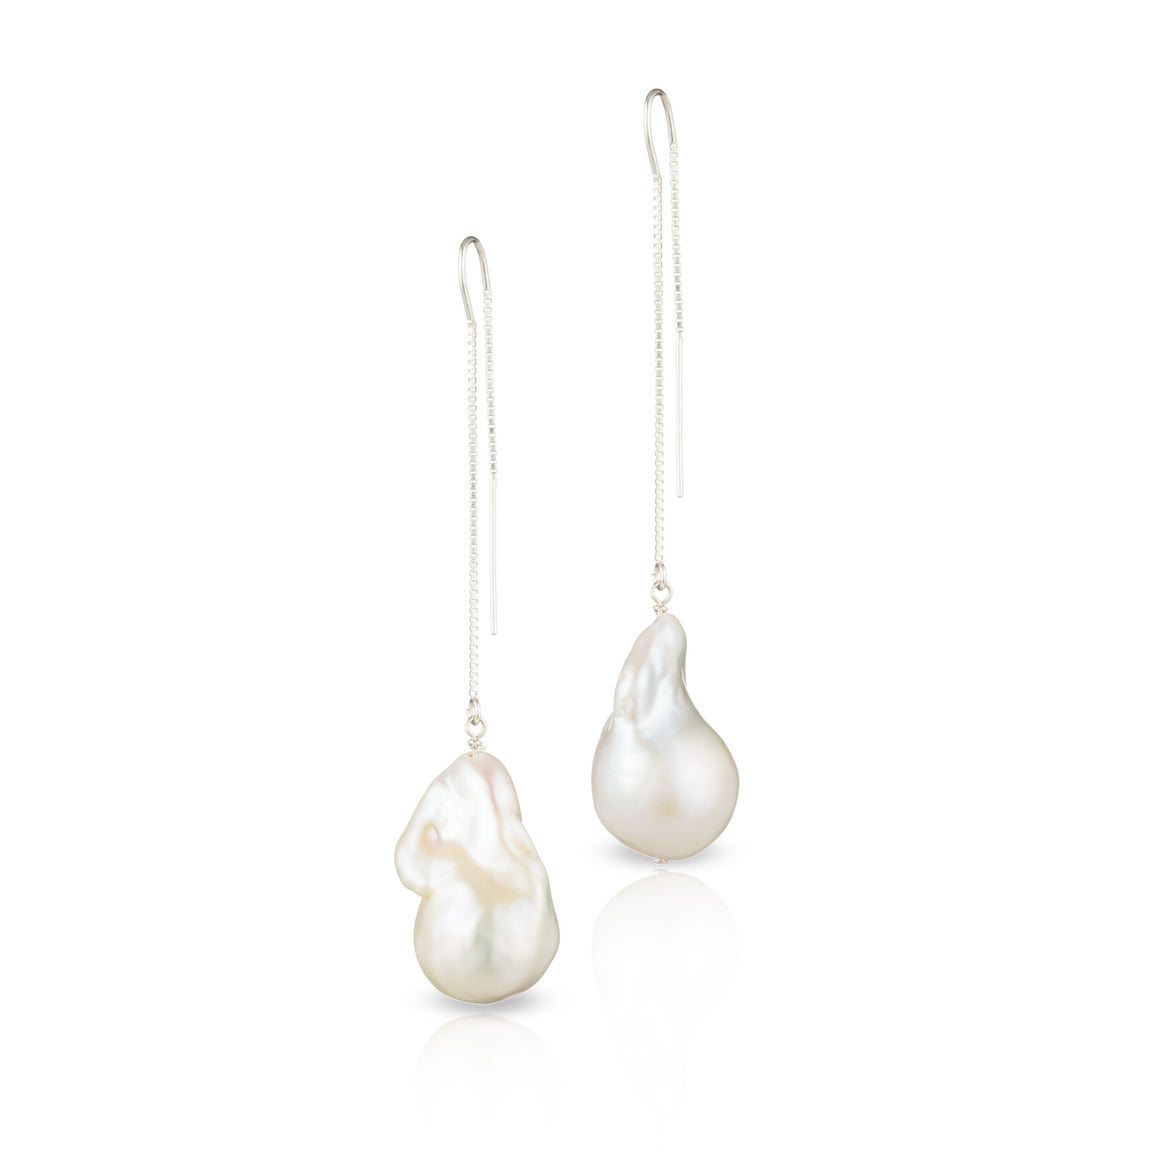 Large White Baroque Freshwater Pearl Drop And Dangle Threader Earrings In Sterling Silver